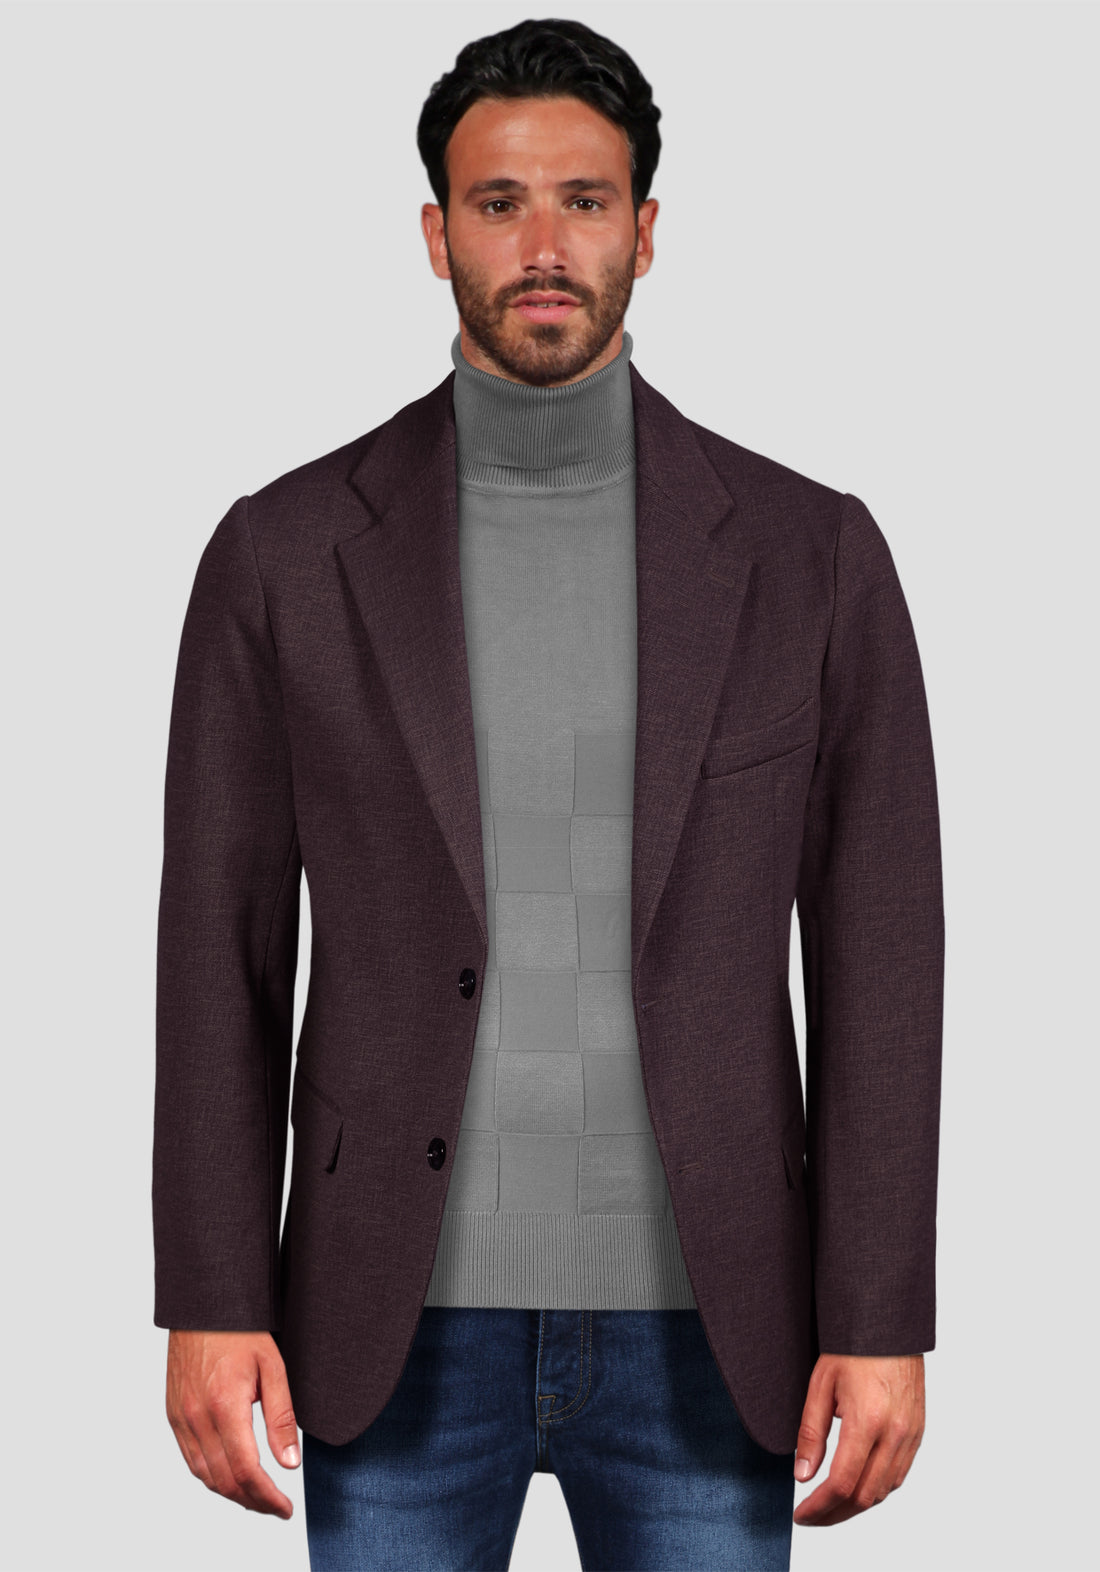 Two-button jacket in elastic fabric - Bordeaux